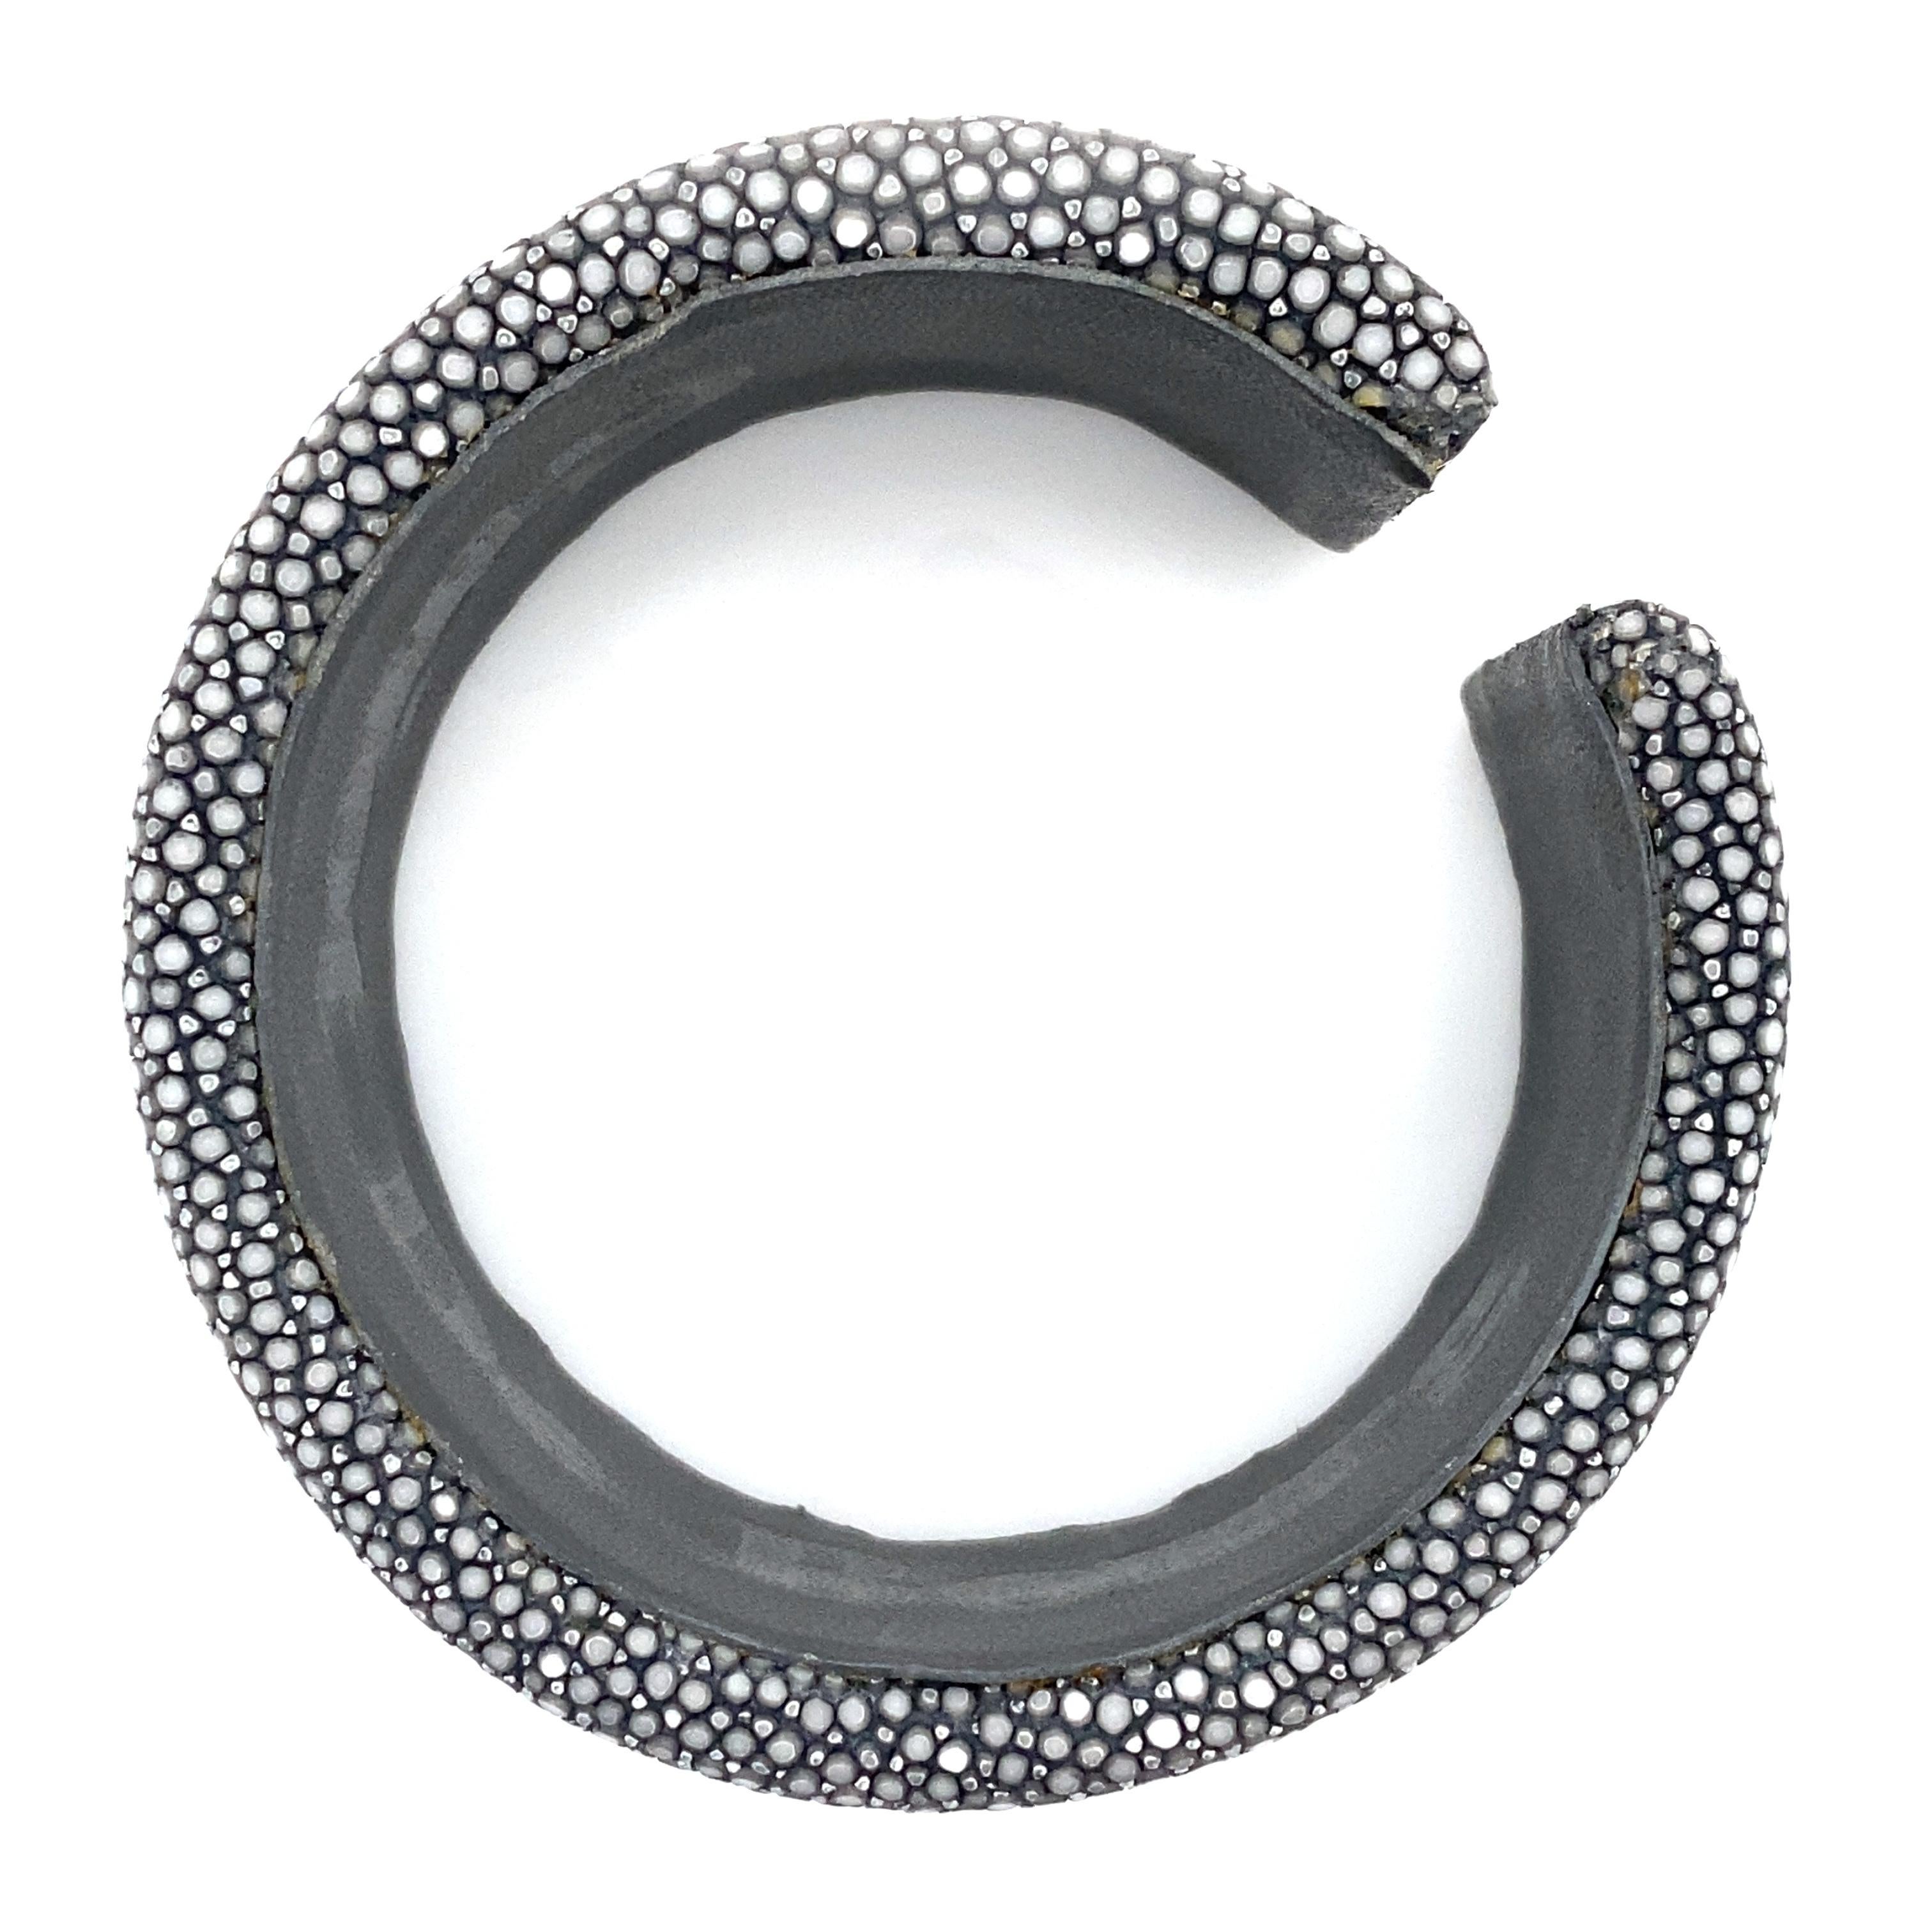 Sumptuous cuff bracelet in grey shagreen. Carefully crafted, this incredibly chic bracelet is a perfect marriage of traditional craftsmanship and contemporary design.

Grey shagreen, a rare and precious material, is used to create this unique piece.